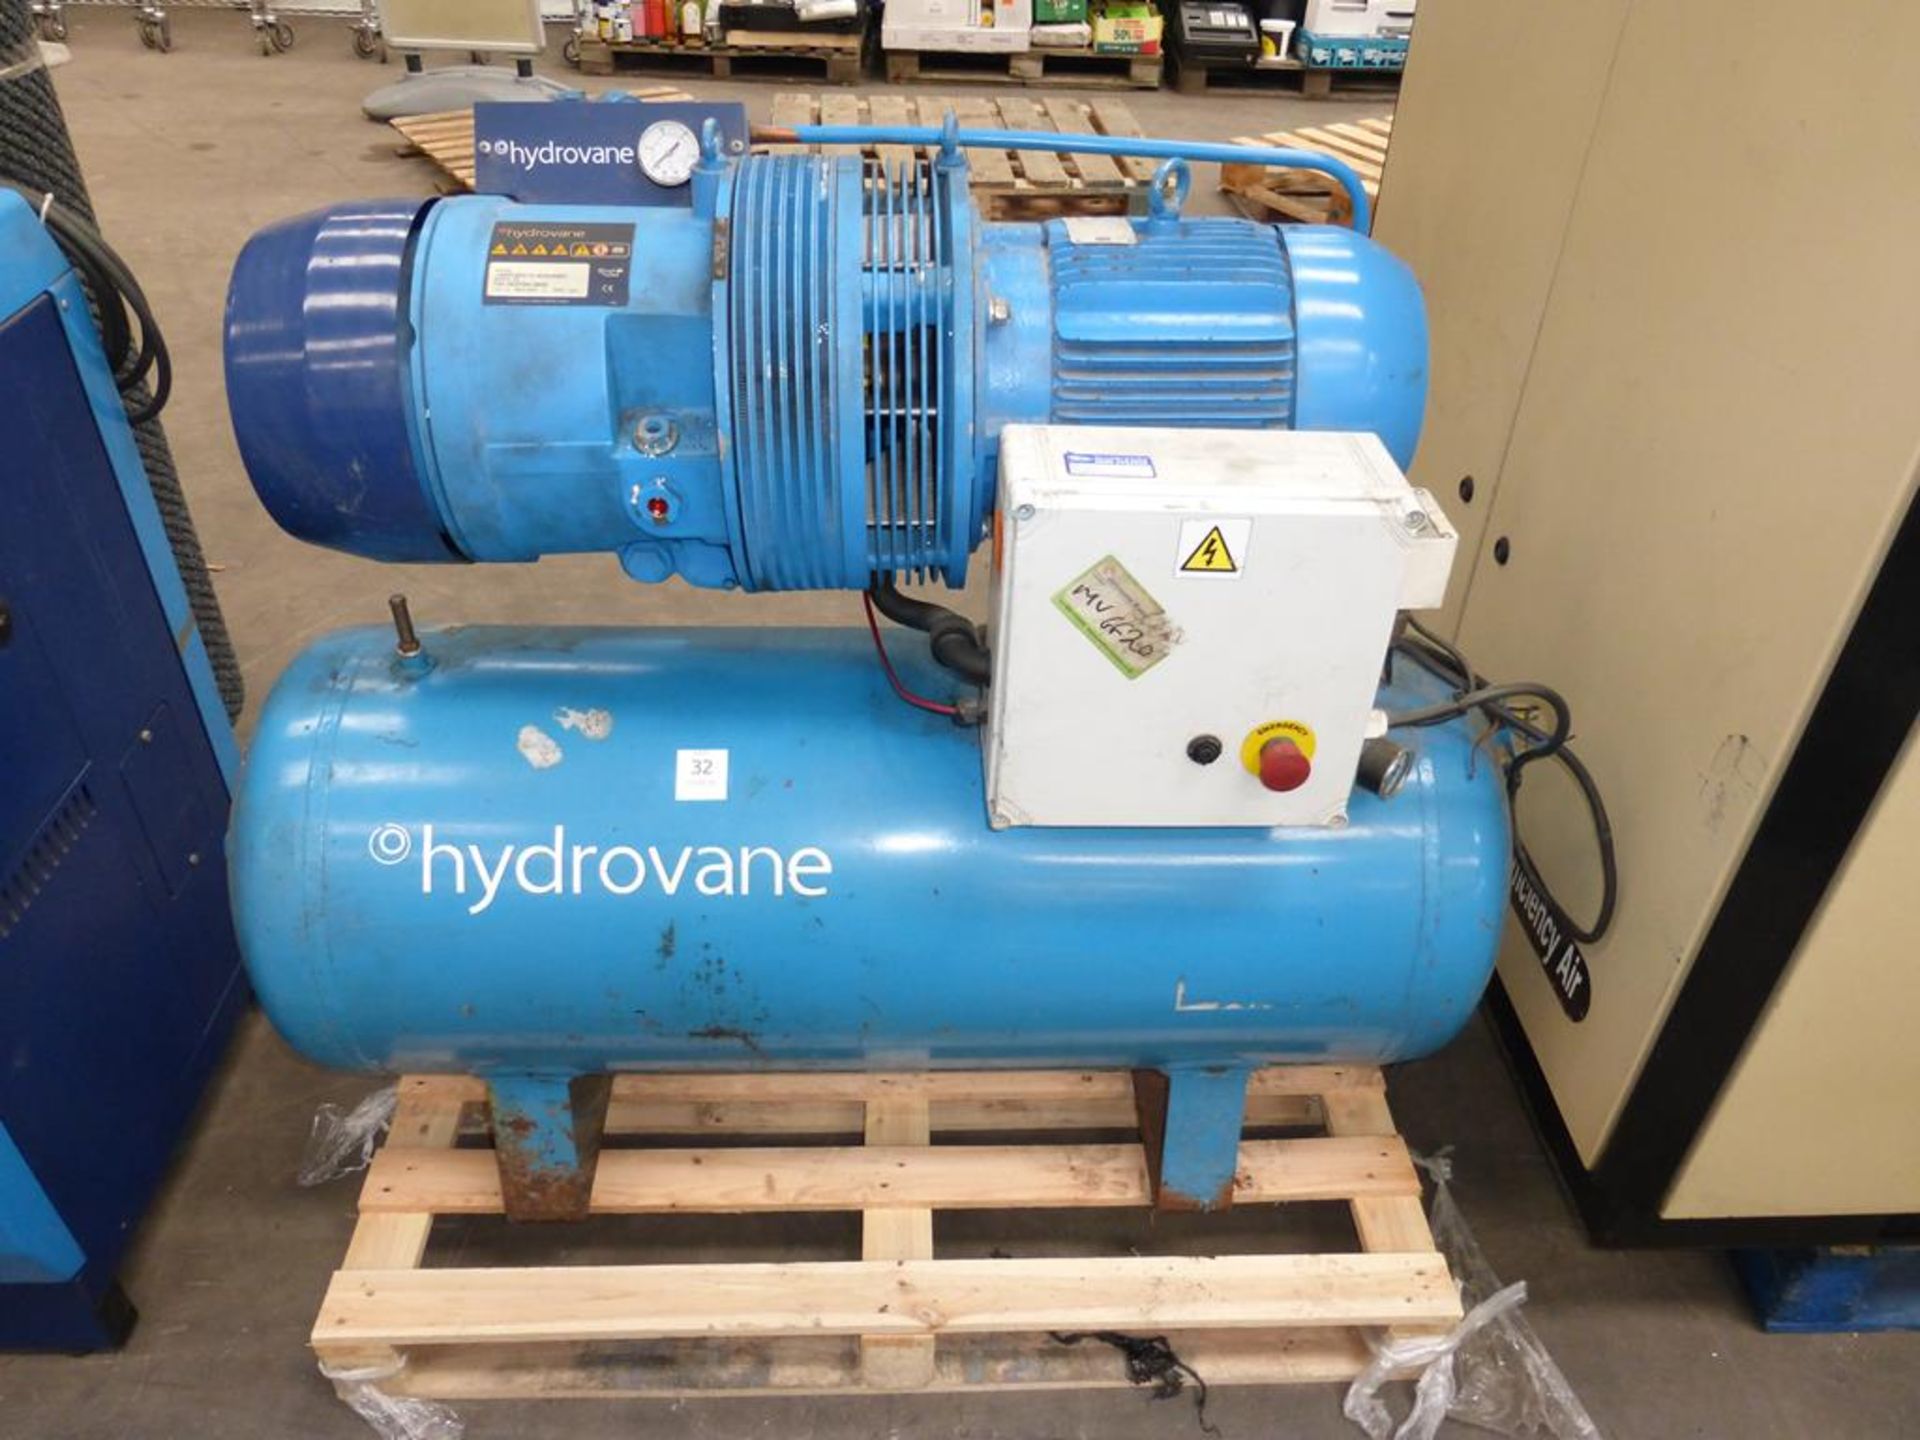 * Hydrovane 705 Purs 10,Compressor, 5.5kW, 11Bar, 1450RPM 3PH. Please note there is a £5 + VAT lift